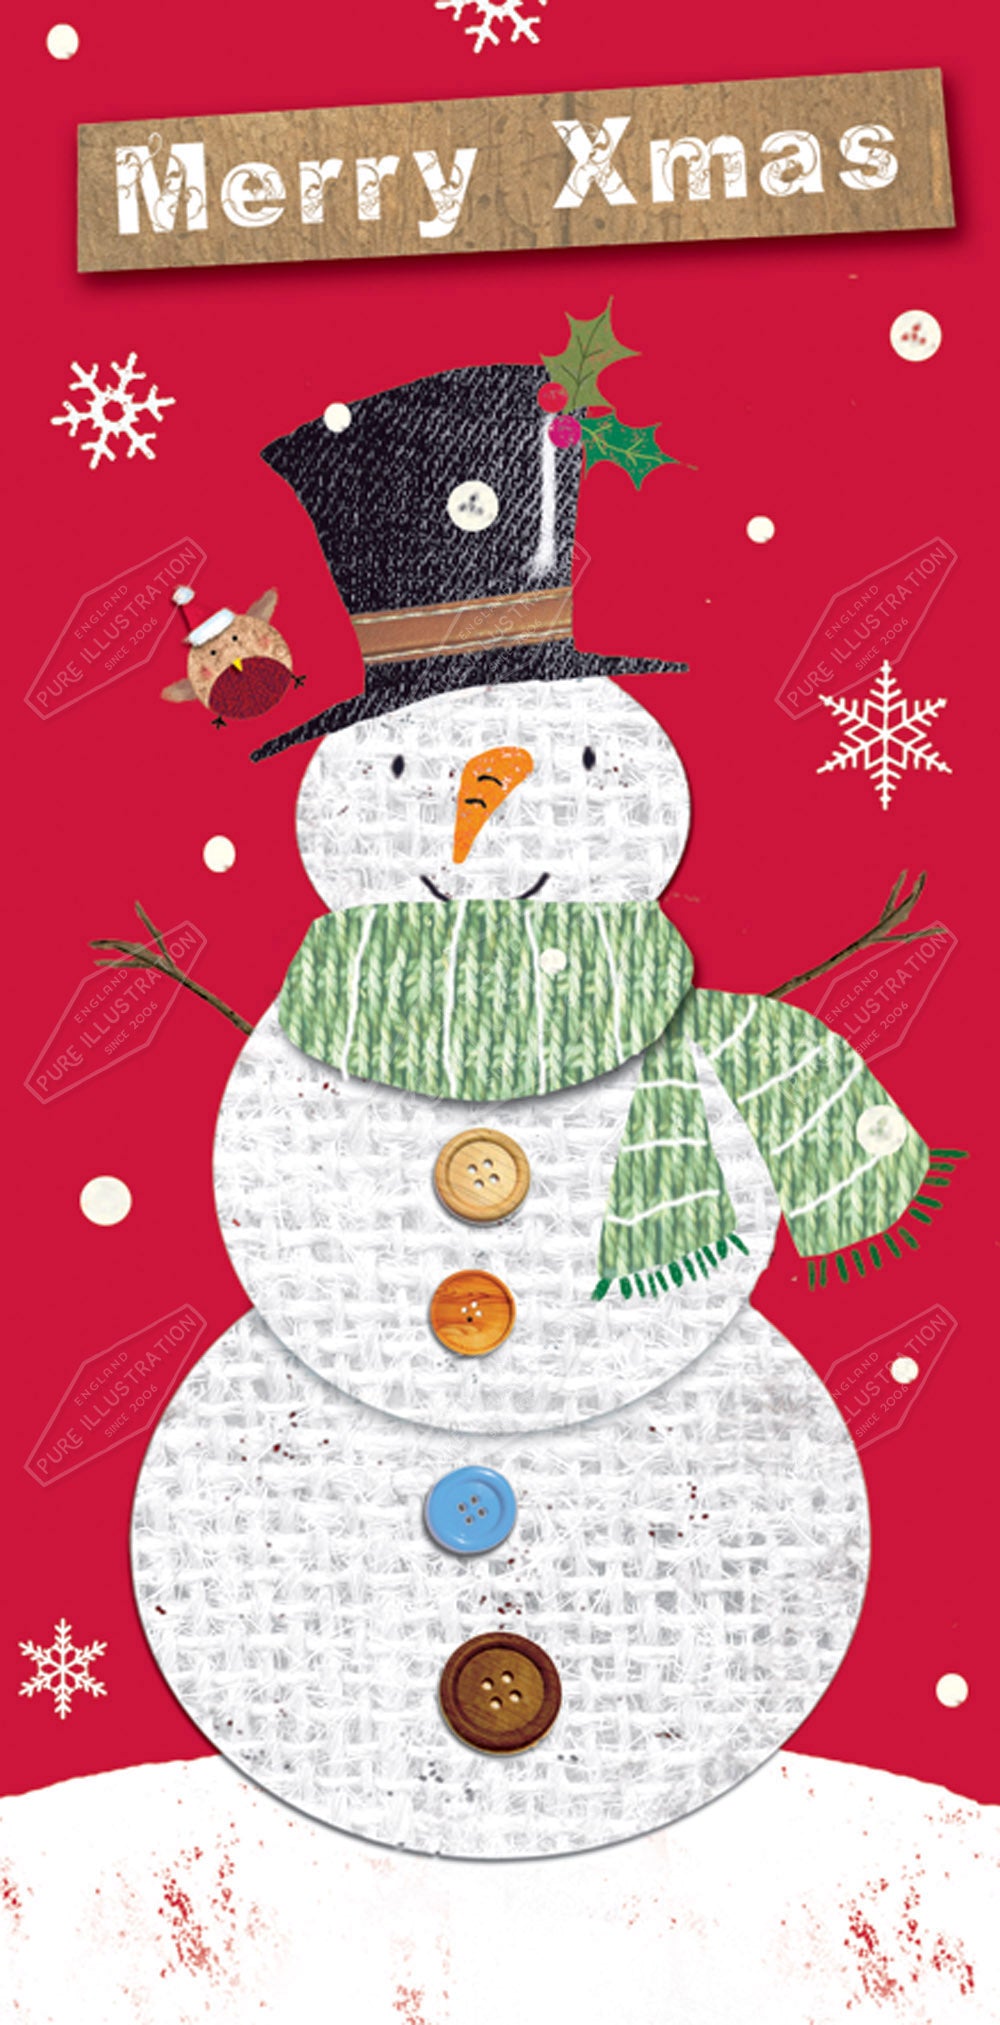 00029604CRE Christmas Snowman Design by Cory Reid for Pure Art Licensing Agency